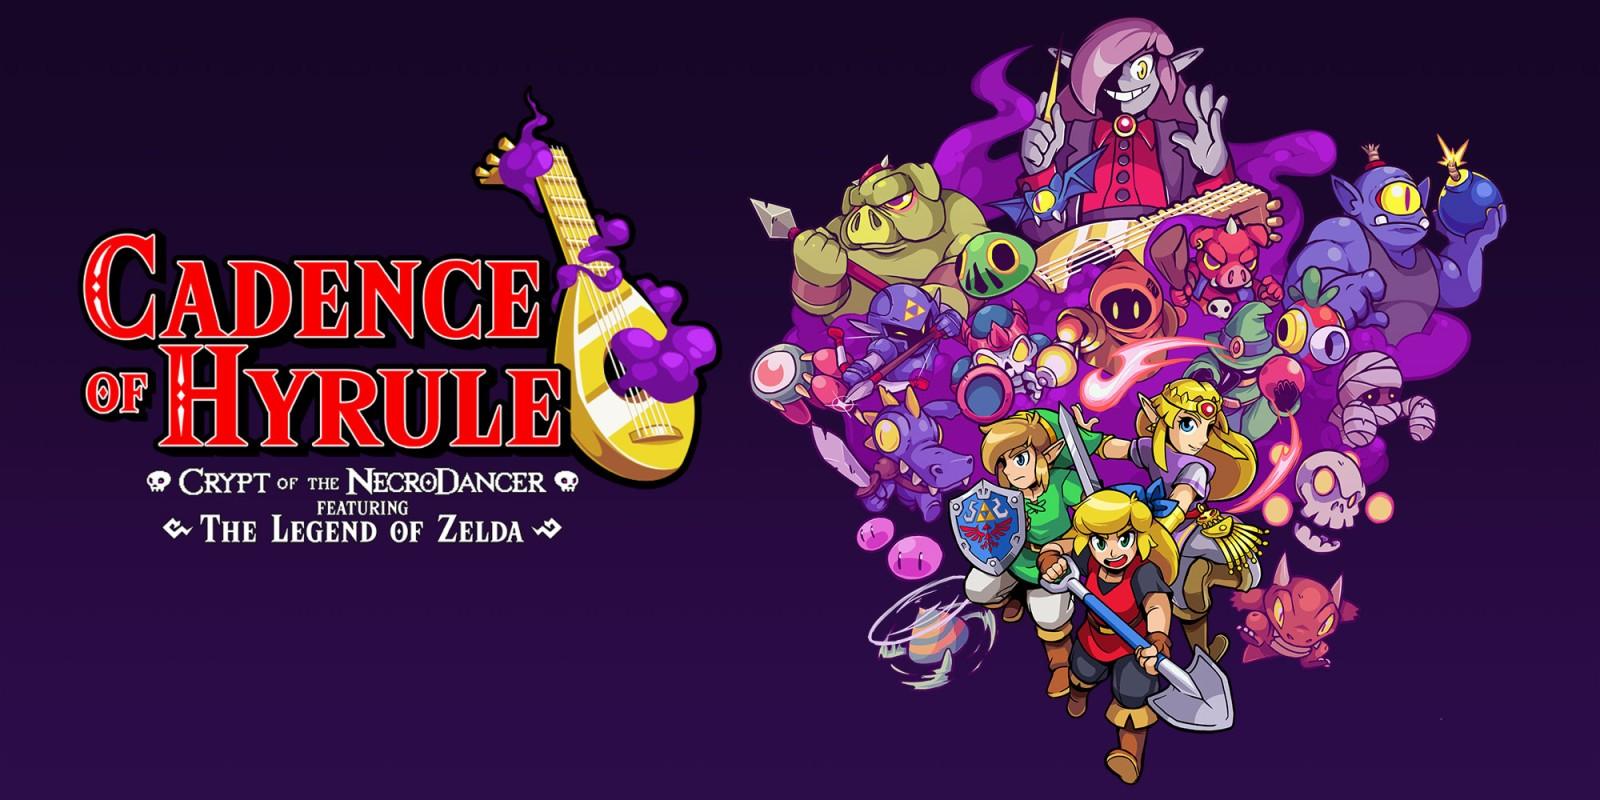 Cadence of Hyrule PC Version Full Game Free Download